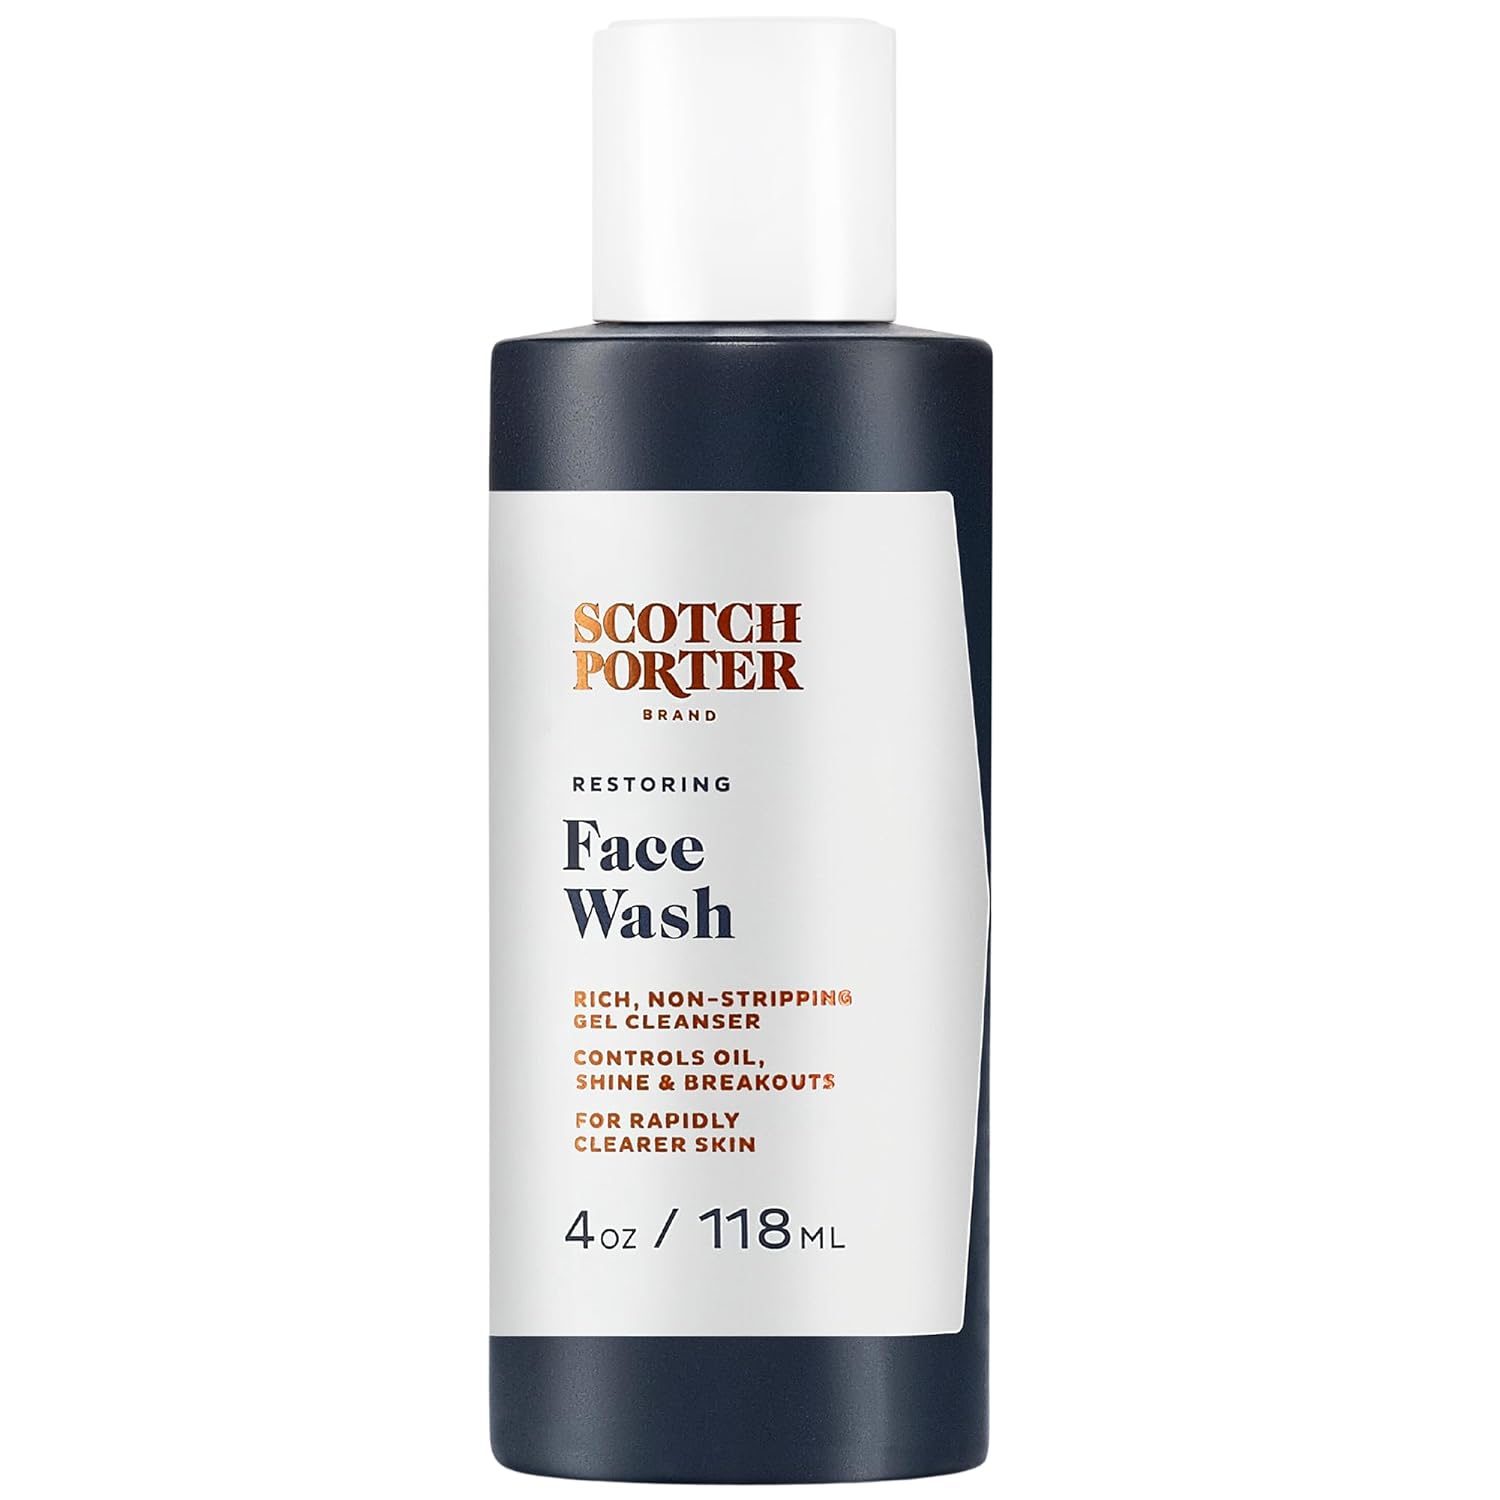 Scotch Porter Restoring Face Wash | Rich, Non-Stripping Gel Cleanser | Formulated with Non-Toxic Ingredients, Free of Parabens, Sulfates & Silicones | Vegan | 4oz Bottle